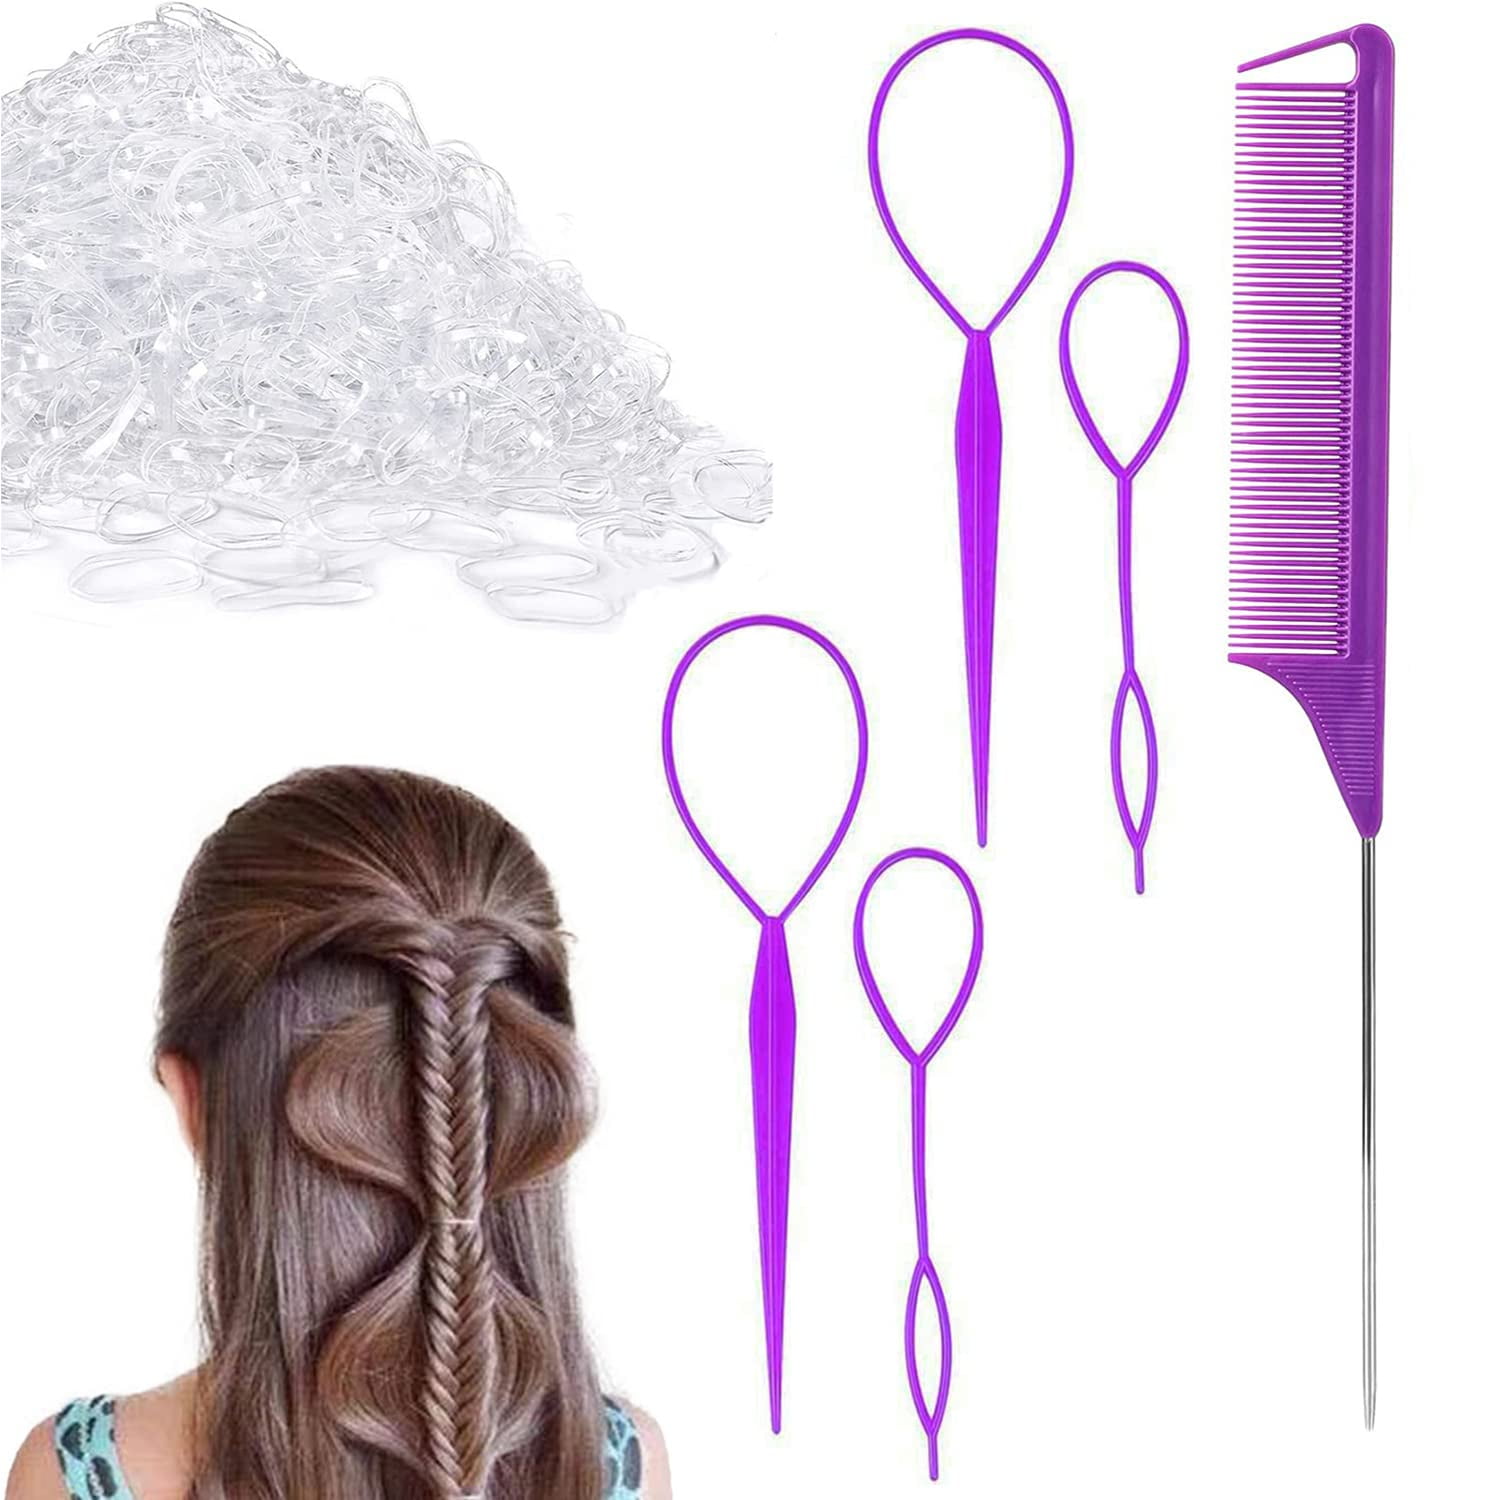 Hair Tail Tools Pack Hair Loop Tool Set With Braid Tool Hair Rubber Bands  Remover Cutter Rat Tail Braiding Comb For Hair Styling - AliExpress